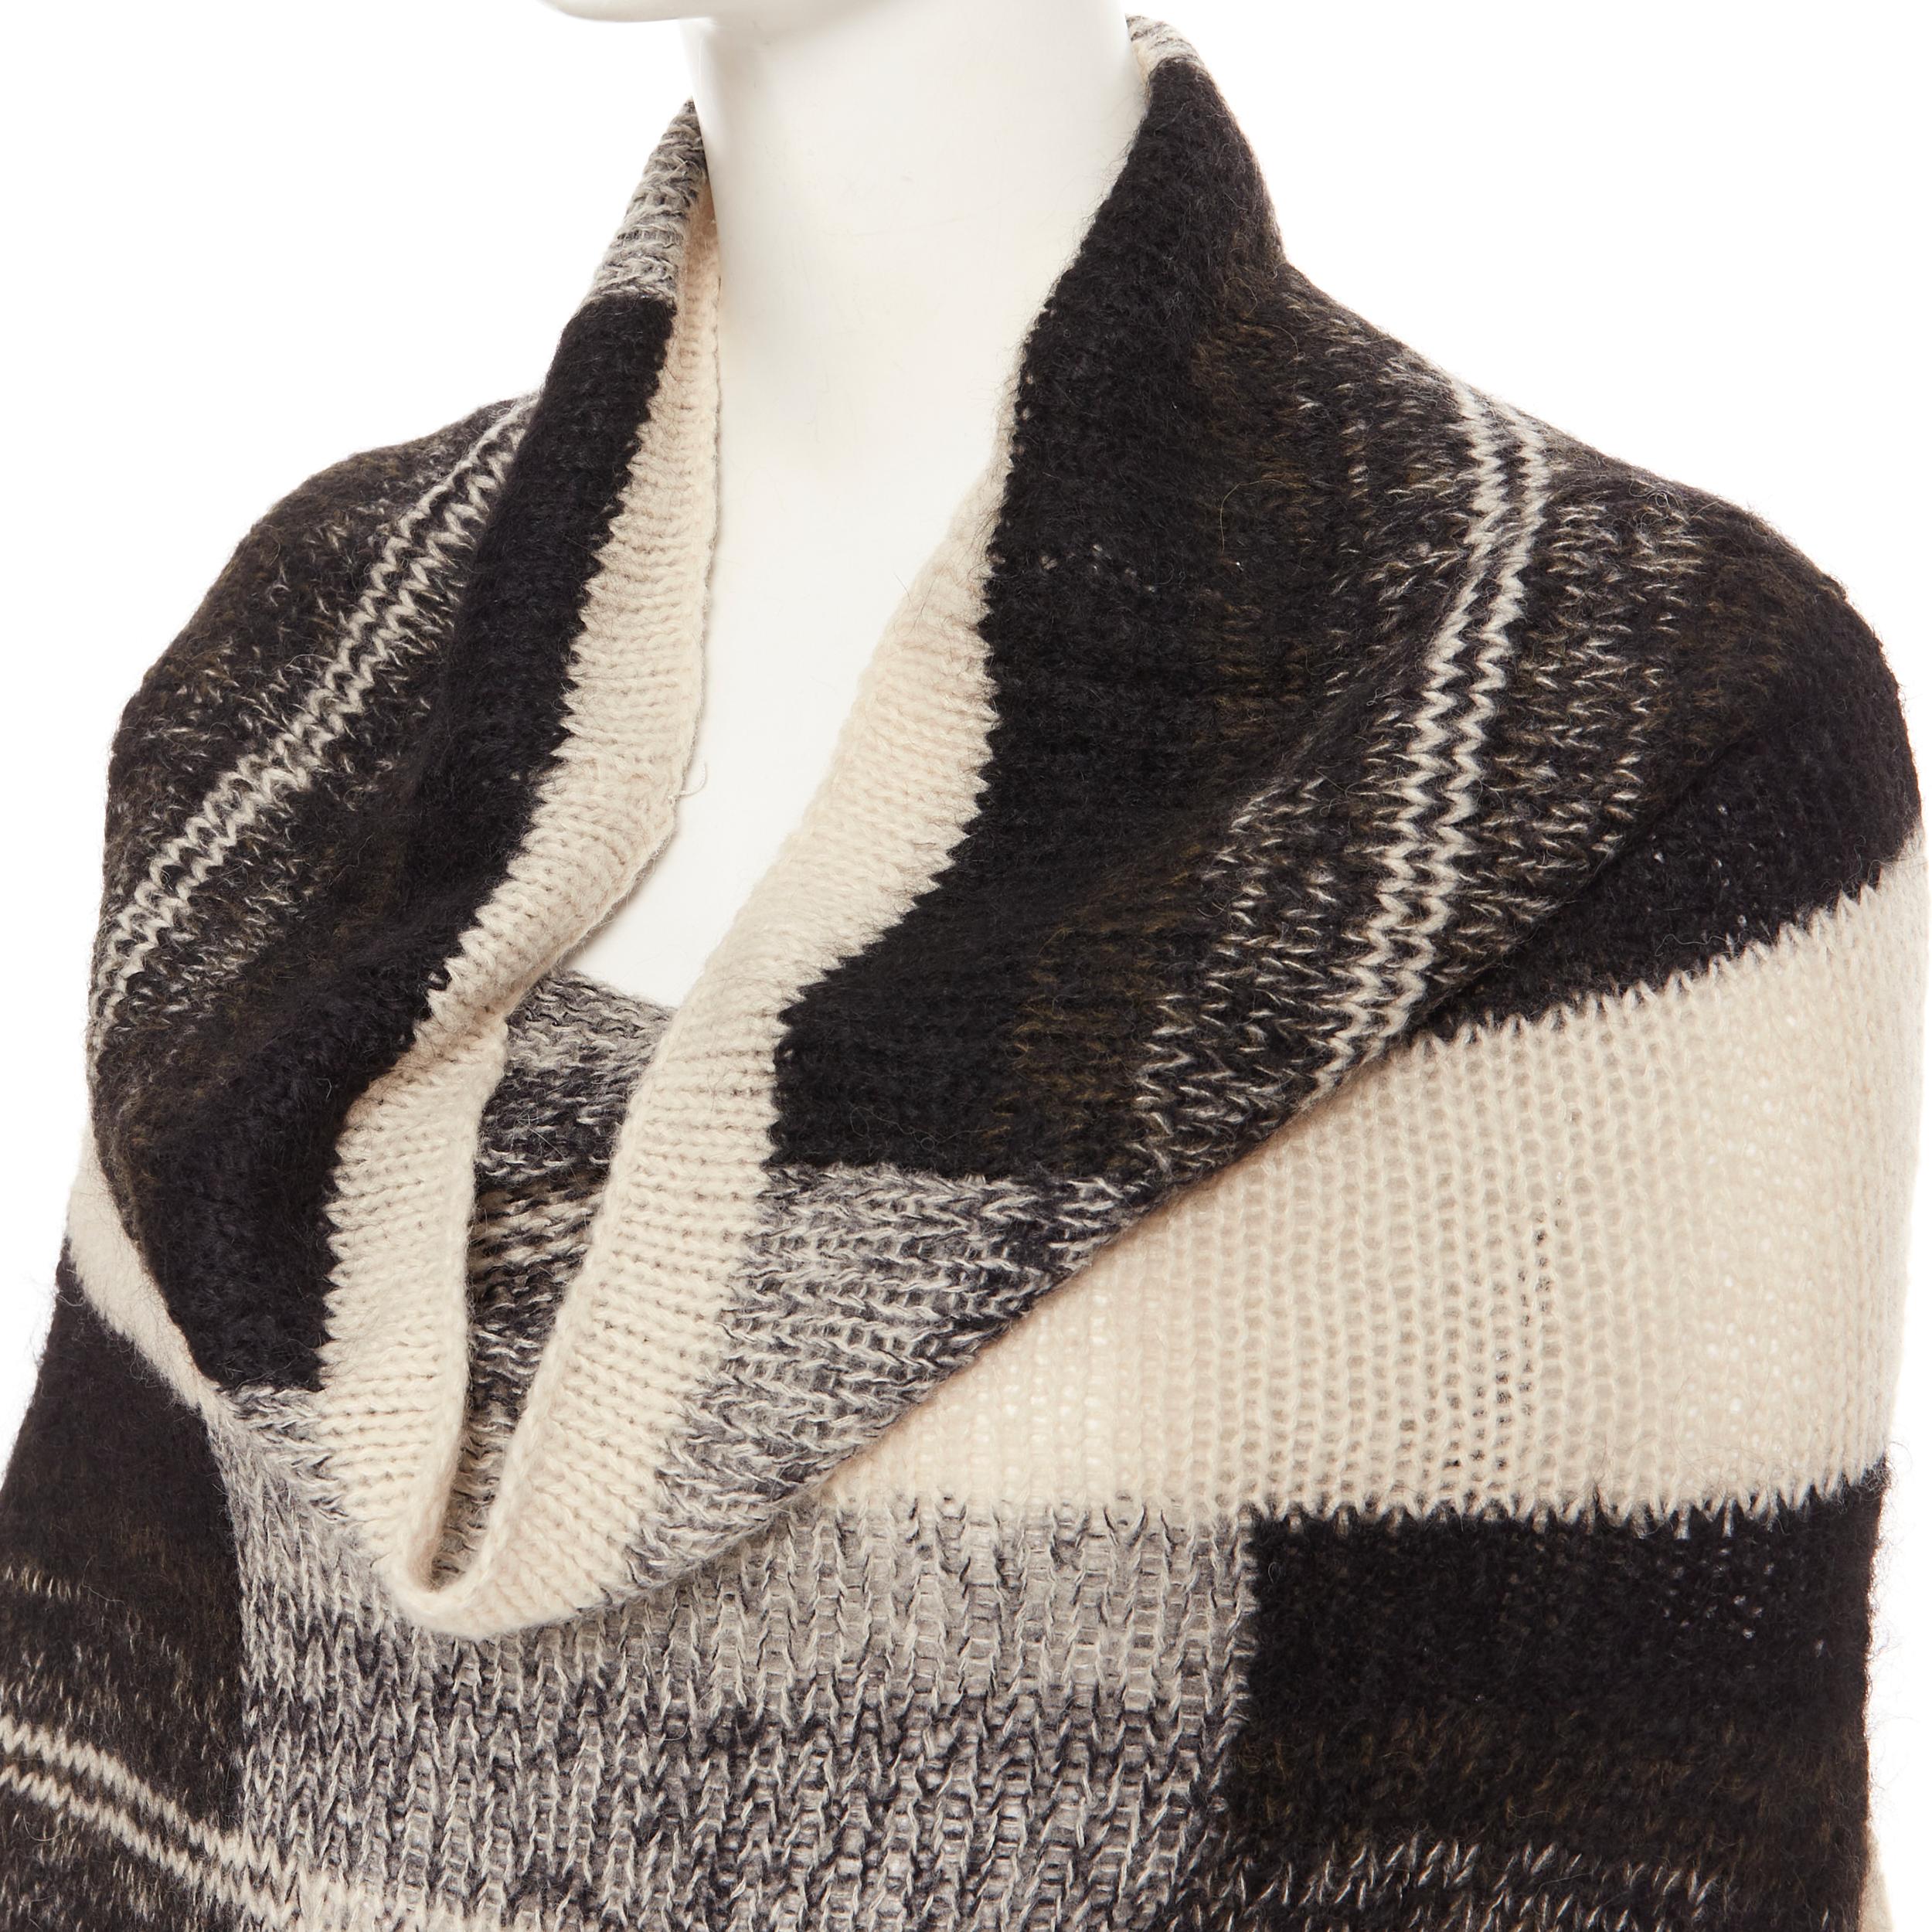 DRIES VAN NOTEN alpaca wool beige black check knit cowl neck sweater dress S 
Reference: CAWG/A00196 
Brand: Dries Van Noten 
Designer: Dries Van Noten 
Material: Alpaca 
Color: Beige 
Pattern: Check 
Extra Detail: Alpaca wool blend. Beige check.